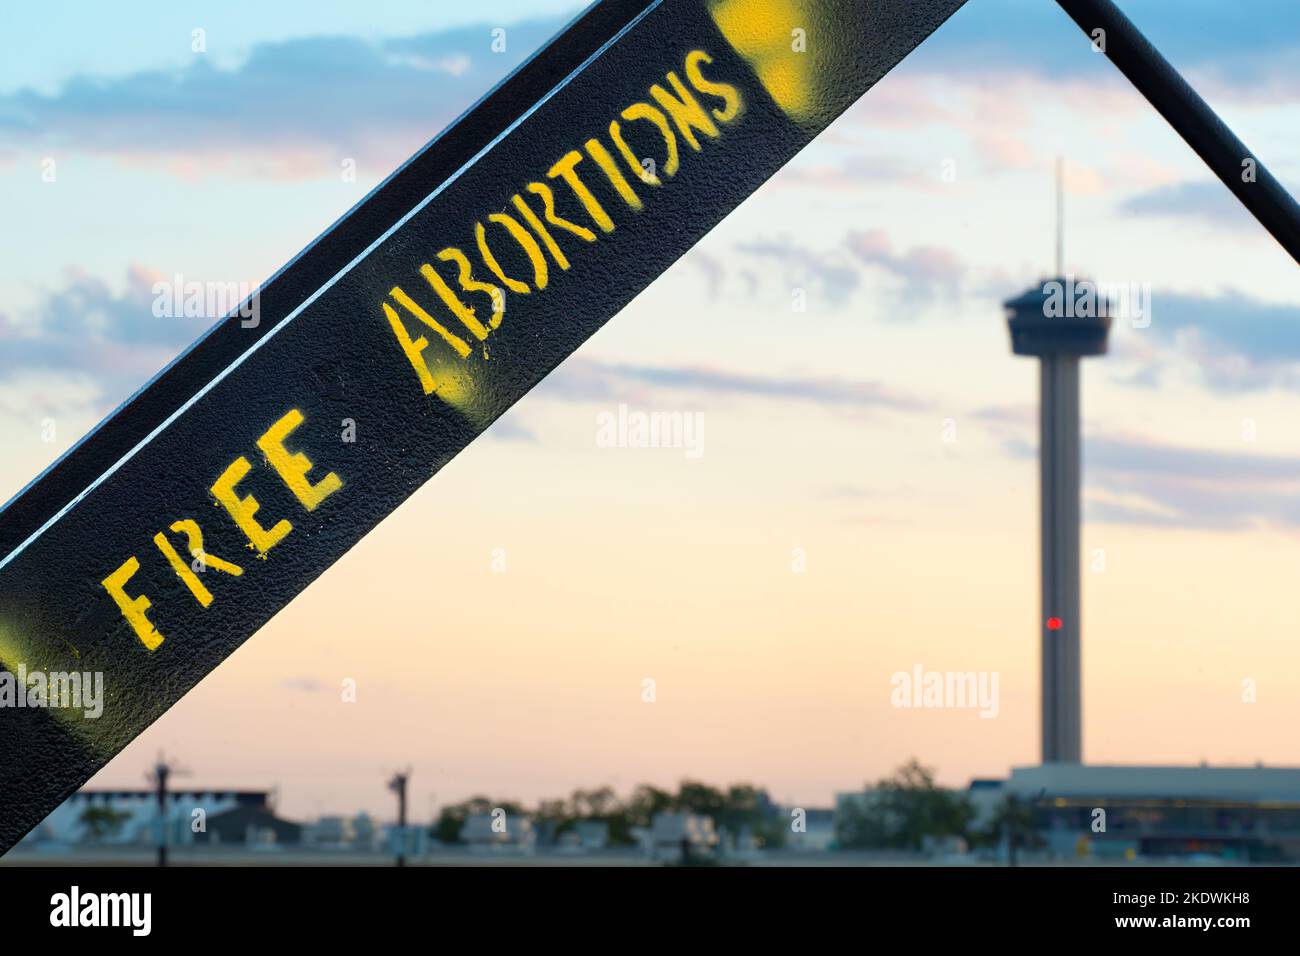 Graffiti that states 'FREE ABORTIONS' on the Hays Street Bridge in San Antonio, Texas, with the Tower of the Americas visible in the background. Stock Photo